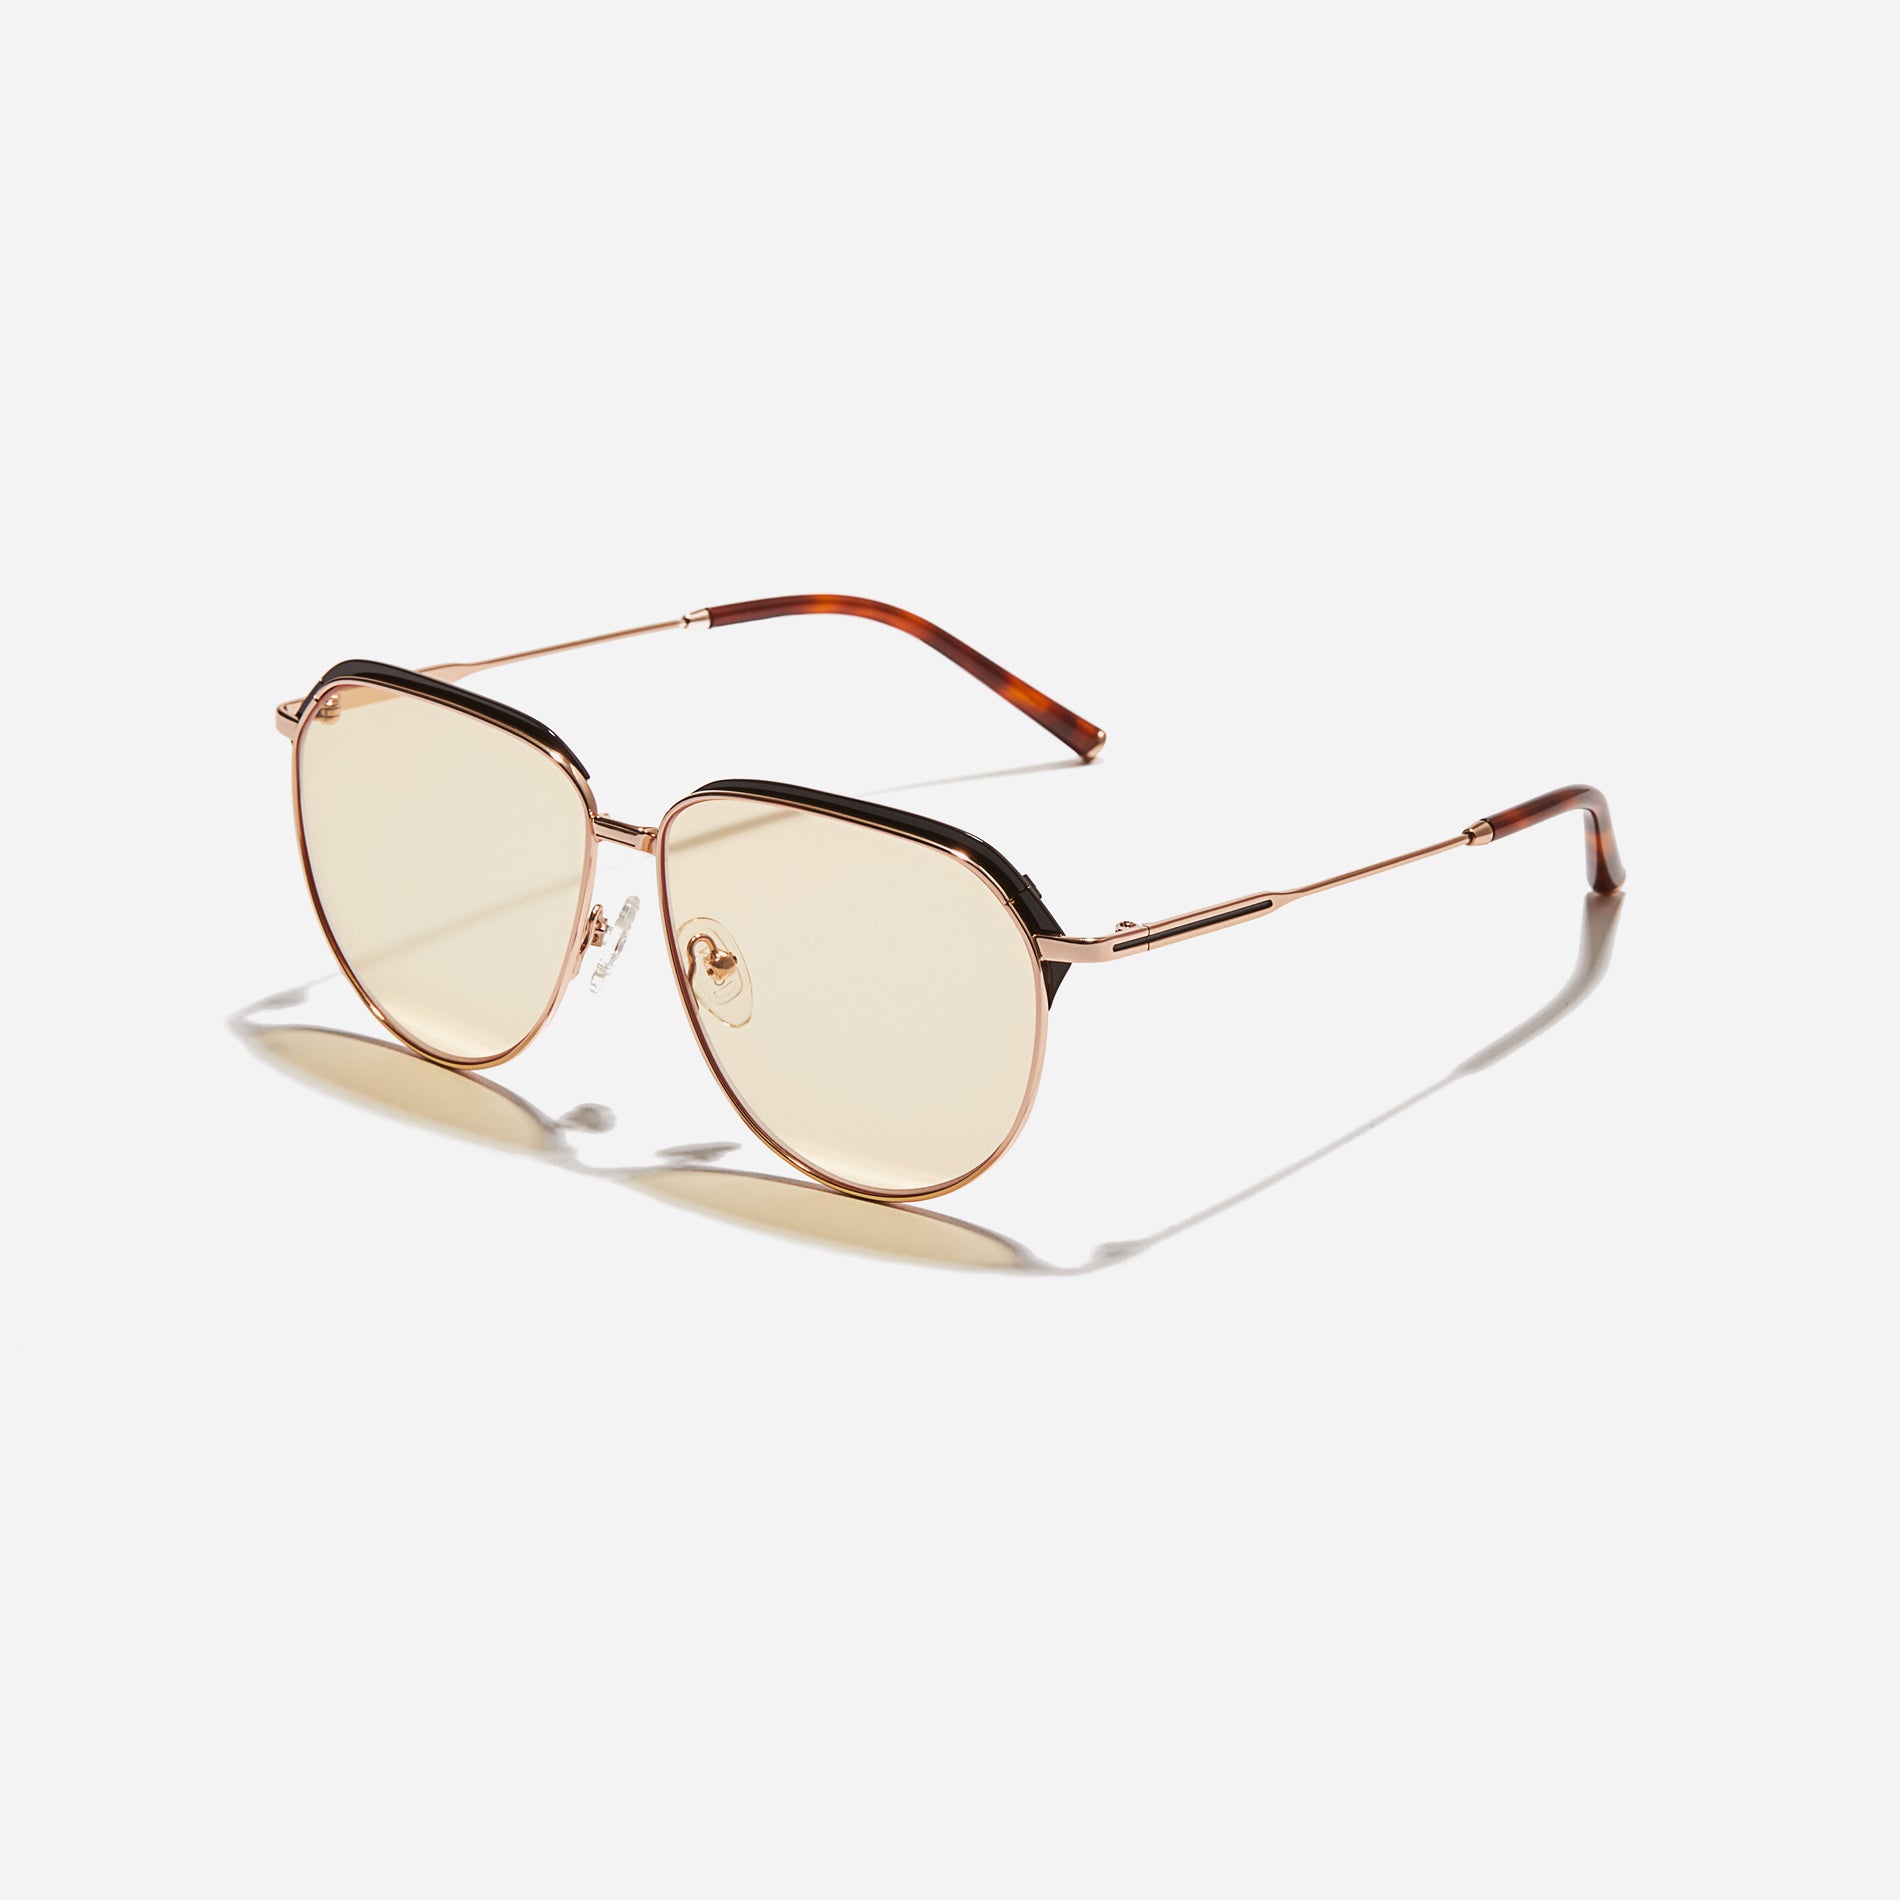 Oversized aviator sunglasses that embody a bold, free-spirited trend. Their sleek temples with subtle detailing elevate their chic and stylish vibe.